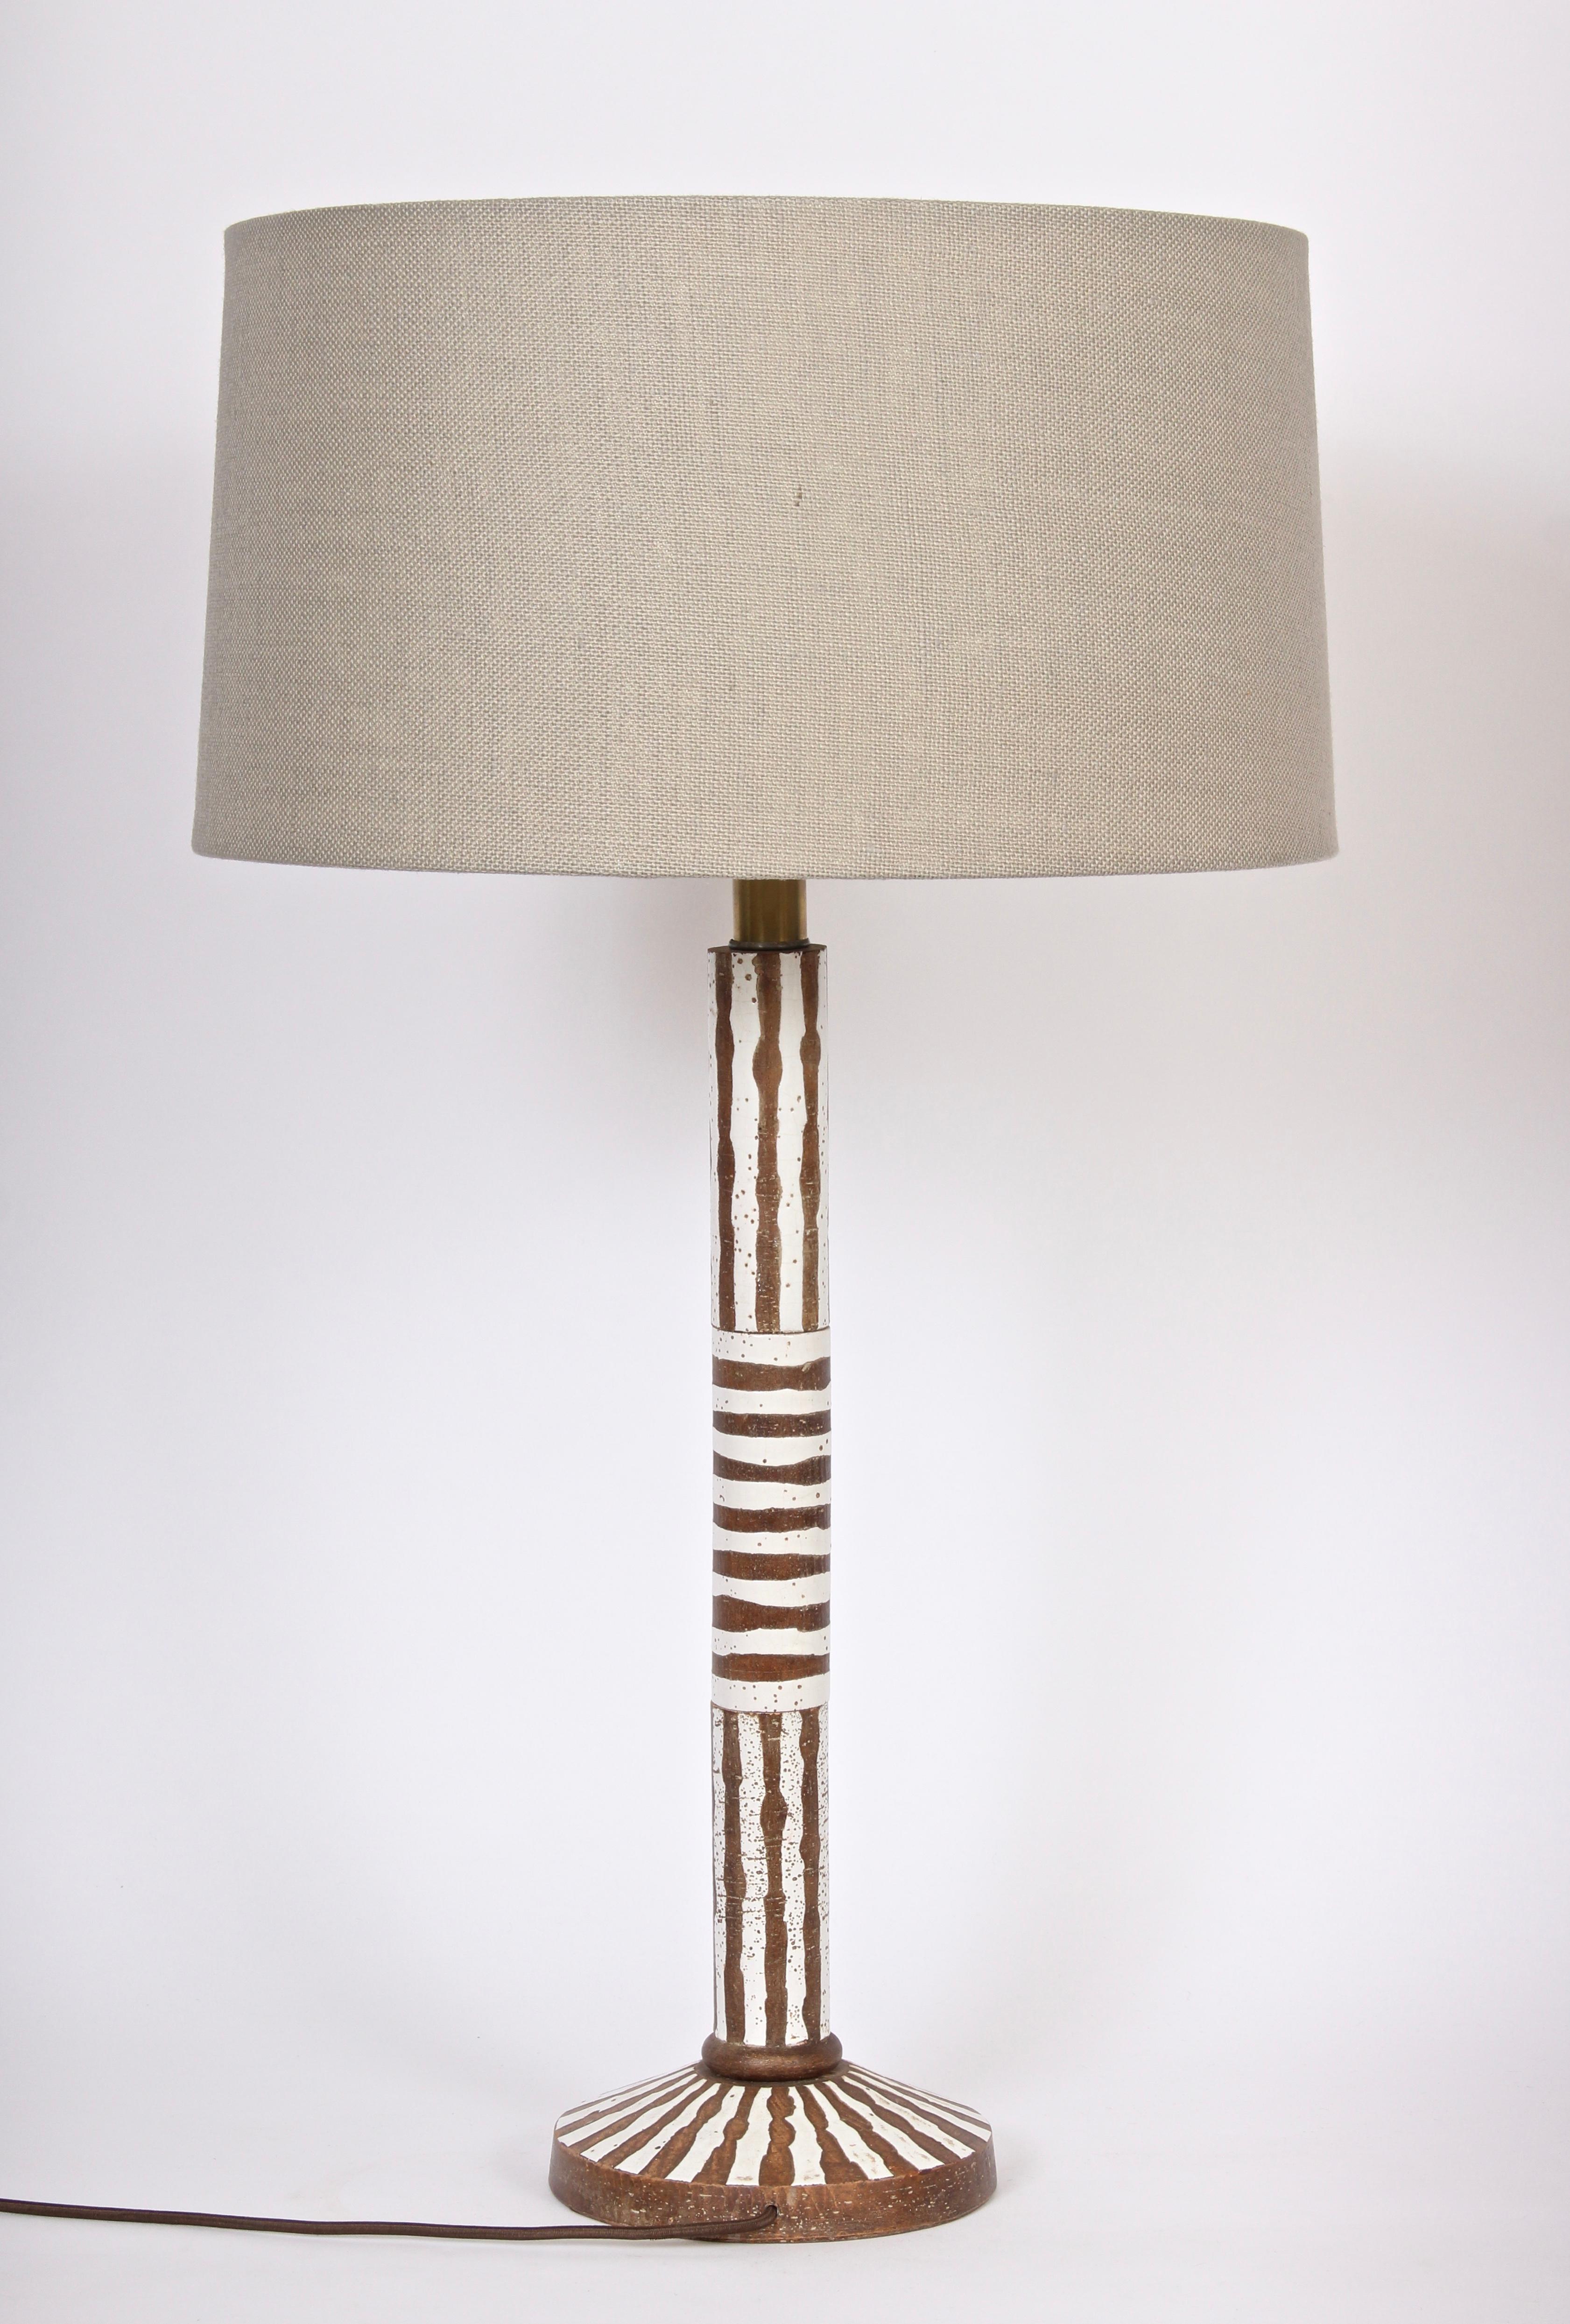 Italian Tall Ugo Zaccagnini Hand Painted Brown and White Stripe Table Lamp, circa 1960